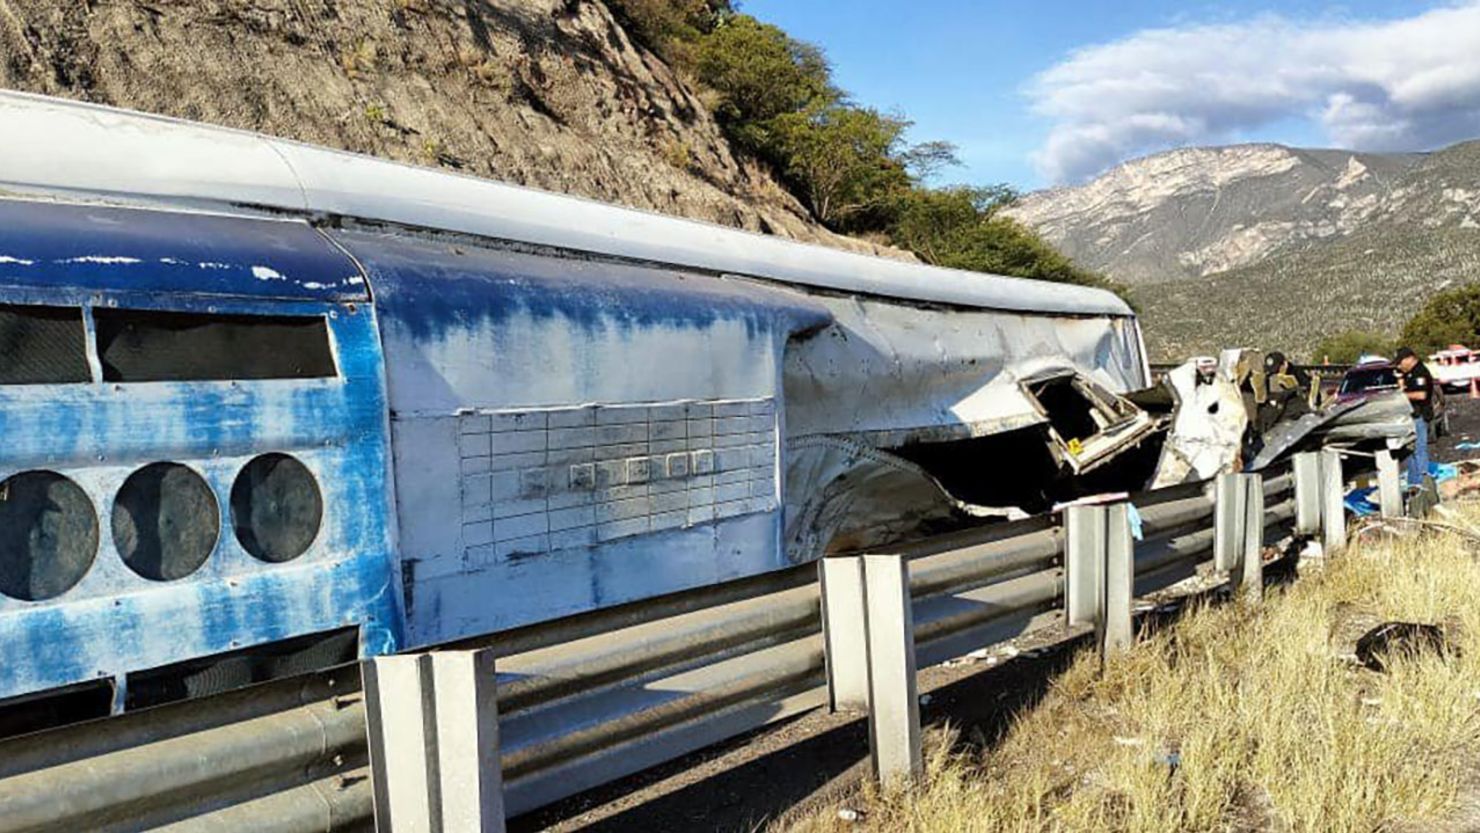 The bus that crashed in Oaxaca state.